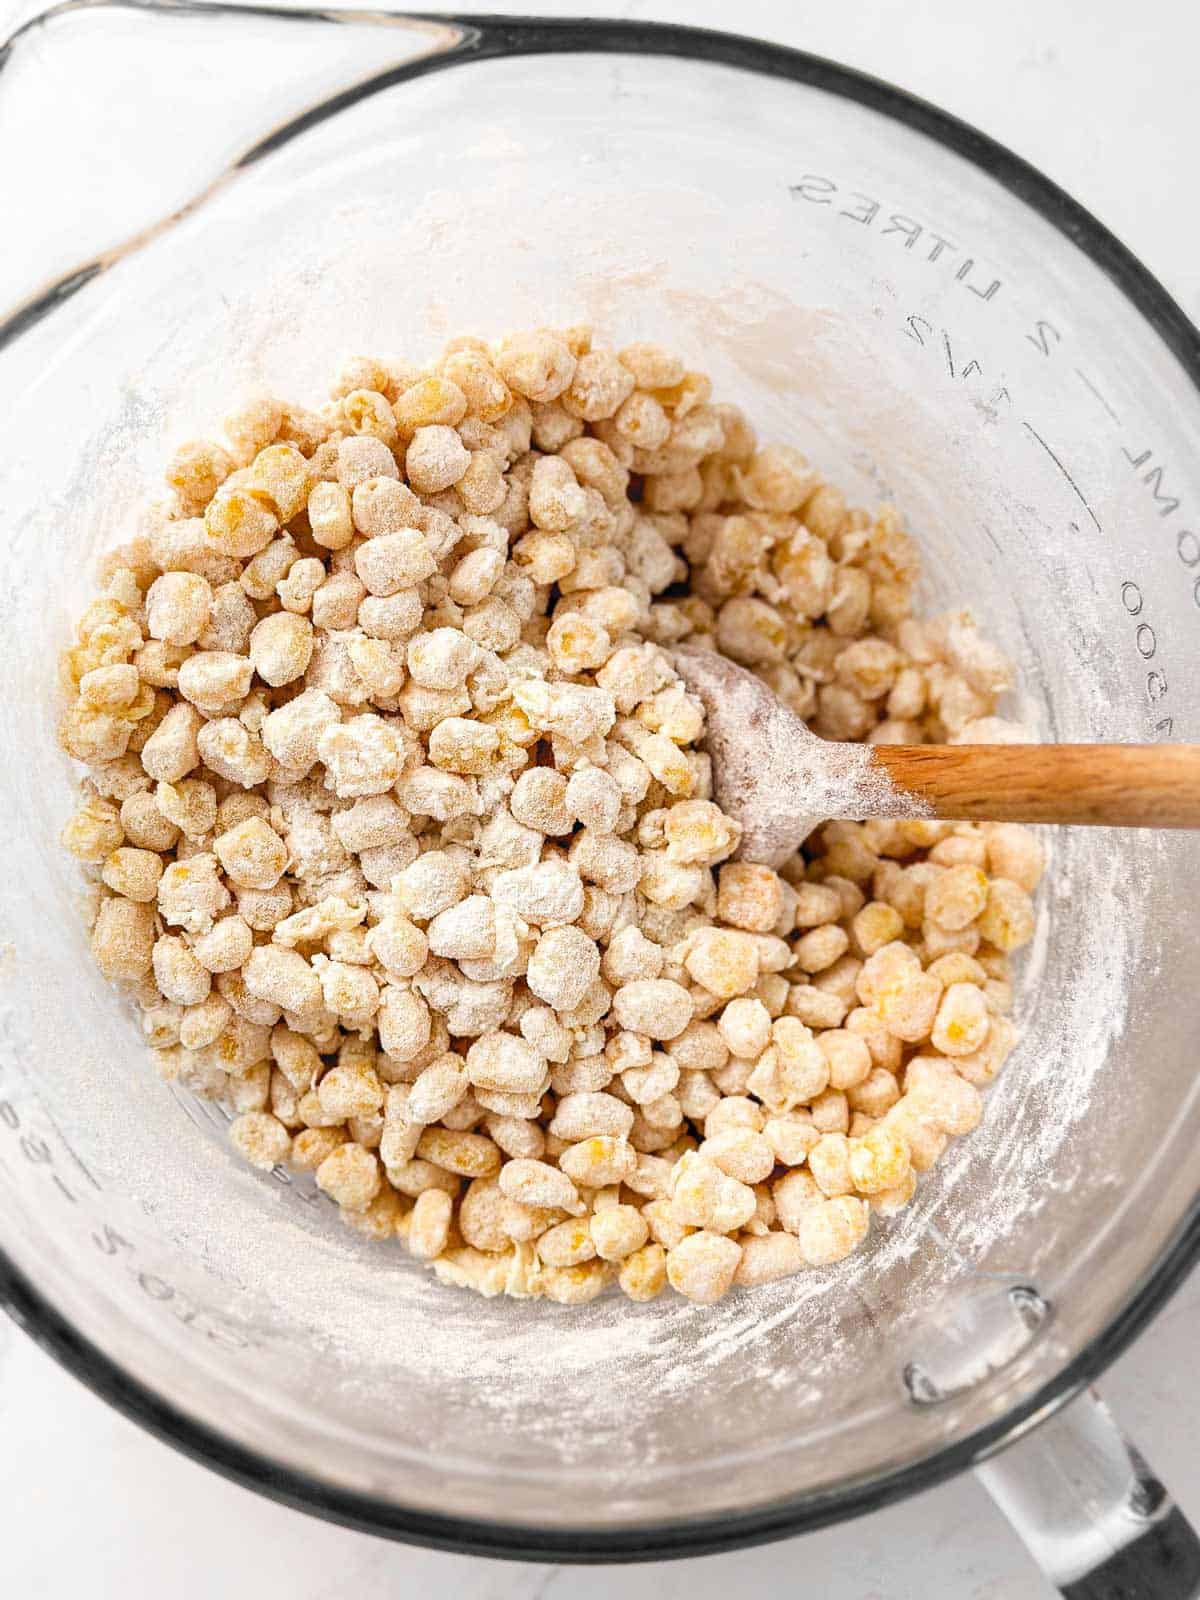 flour coated corn kernels in glass bowl with wooden spoon stuck in